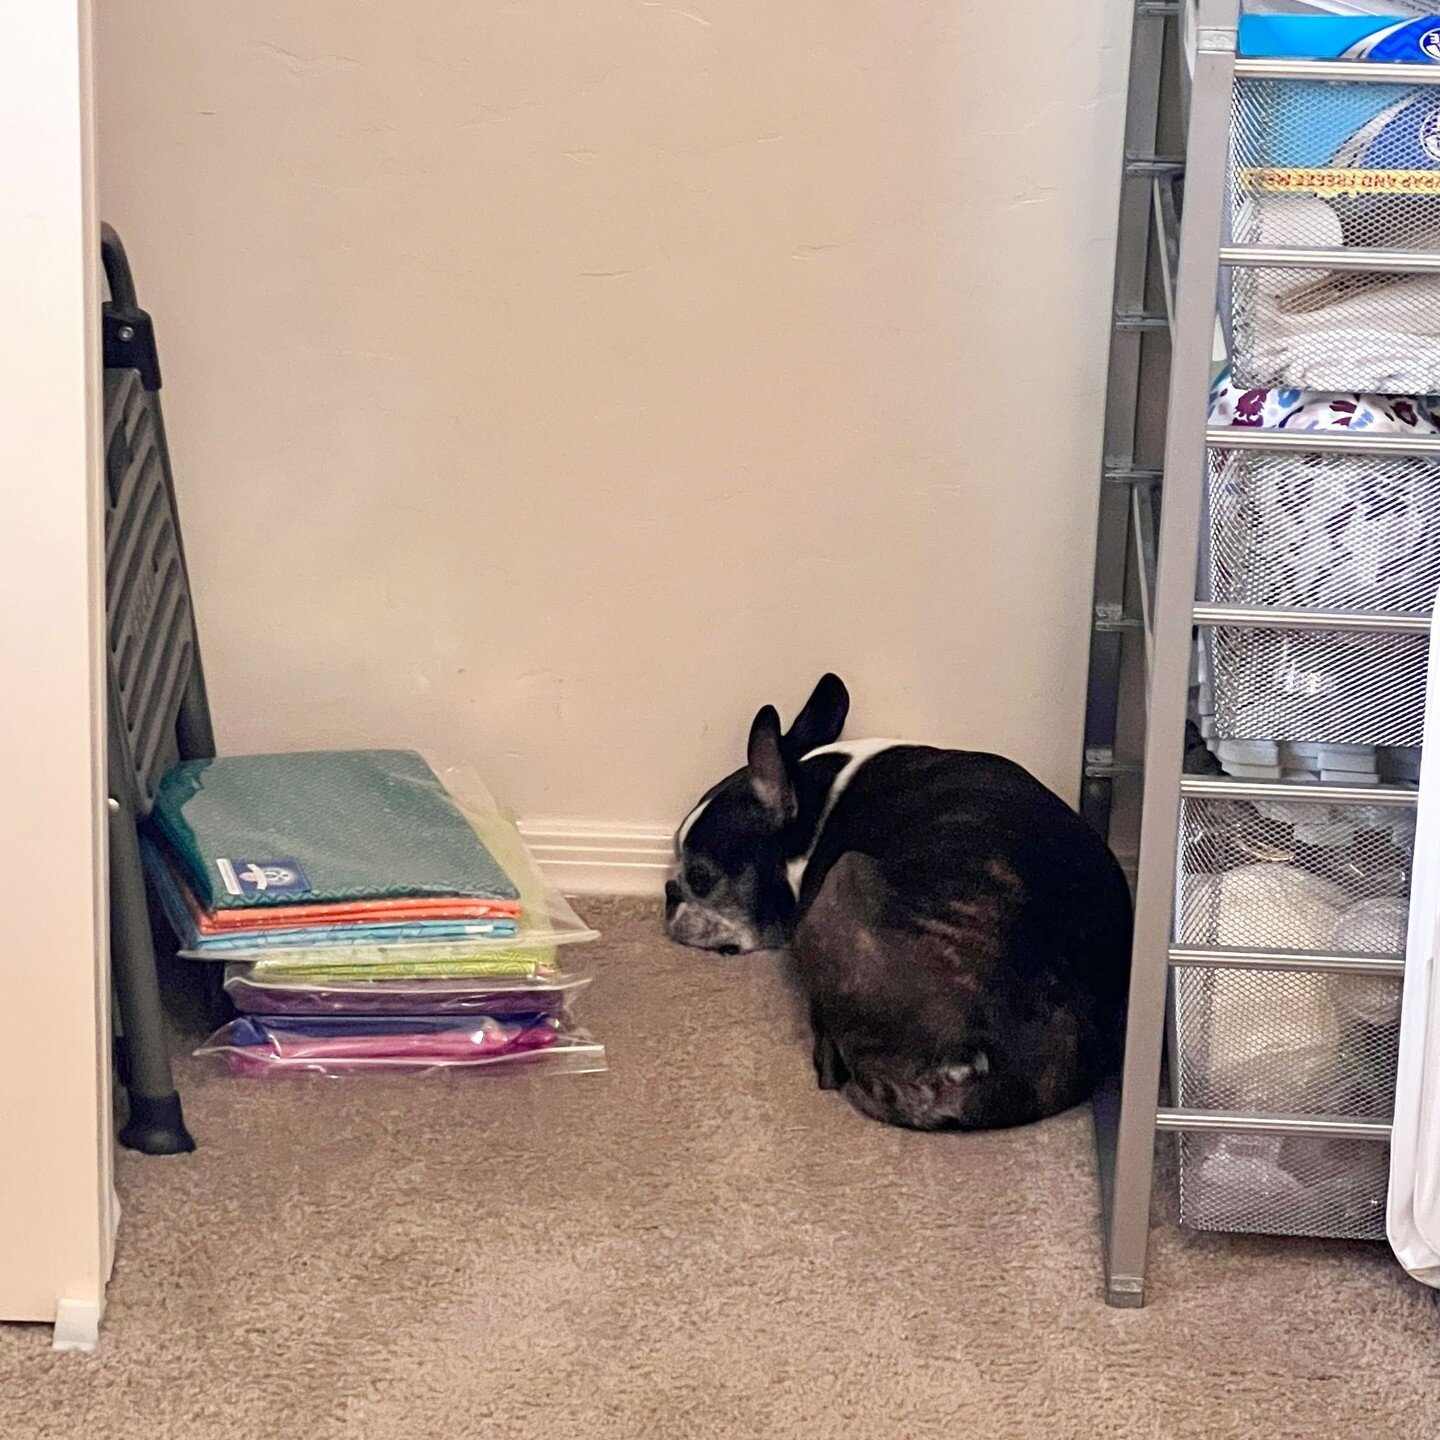 Ricky is napping with the quilting supplies. Of course, because the quilt snuggle tester is essential to the process!⁣
.⁣
#dogsandquilts #quiltsanddogs #sewingroom #quiltsupplies #quilting #quilts #quilt #quiltsofinstagram #quiltersofinstagram #moder